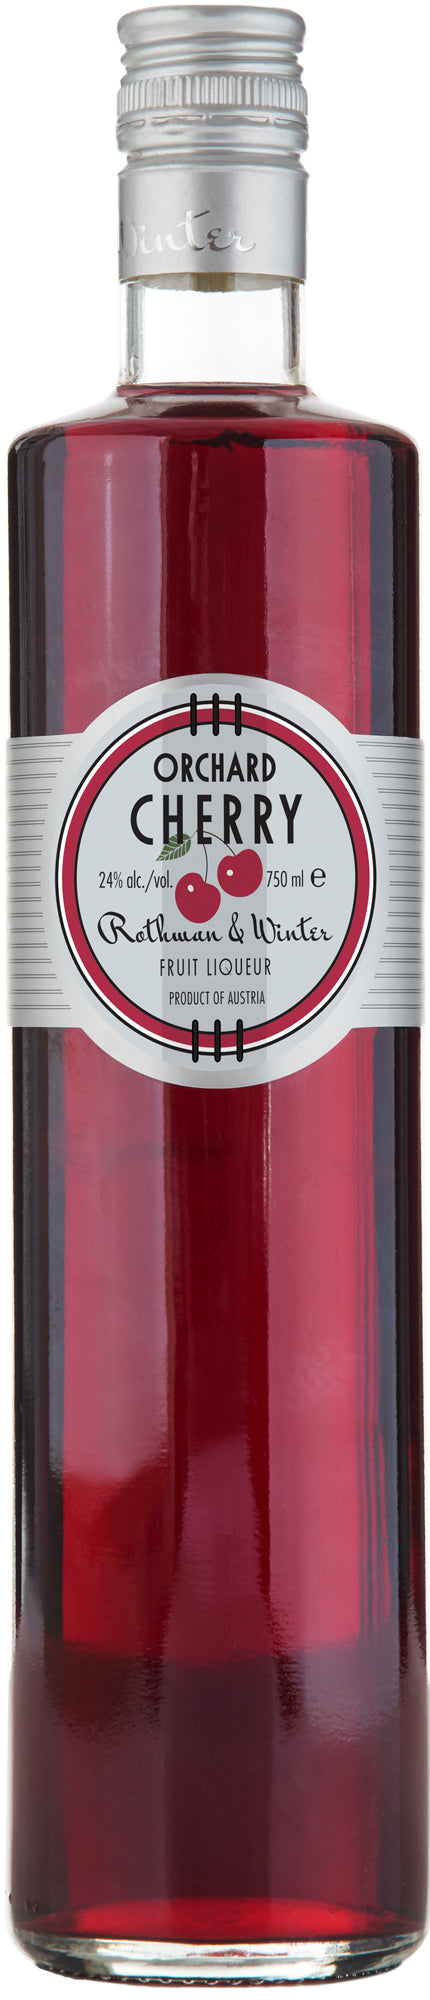 Rothman and Winter Orchard Cherry Liqueur (750ml)